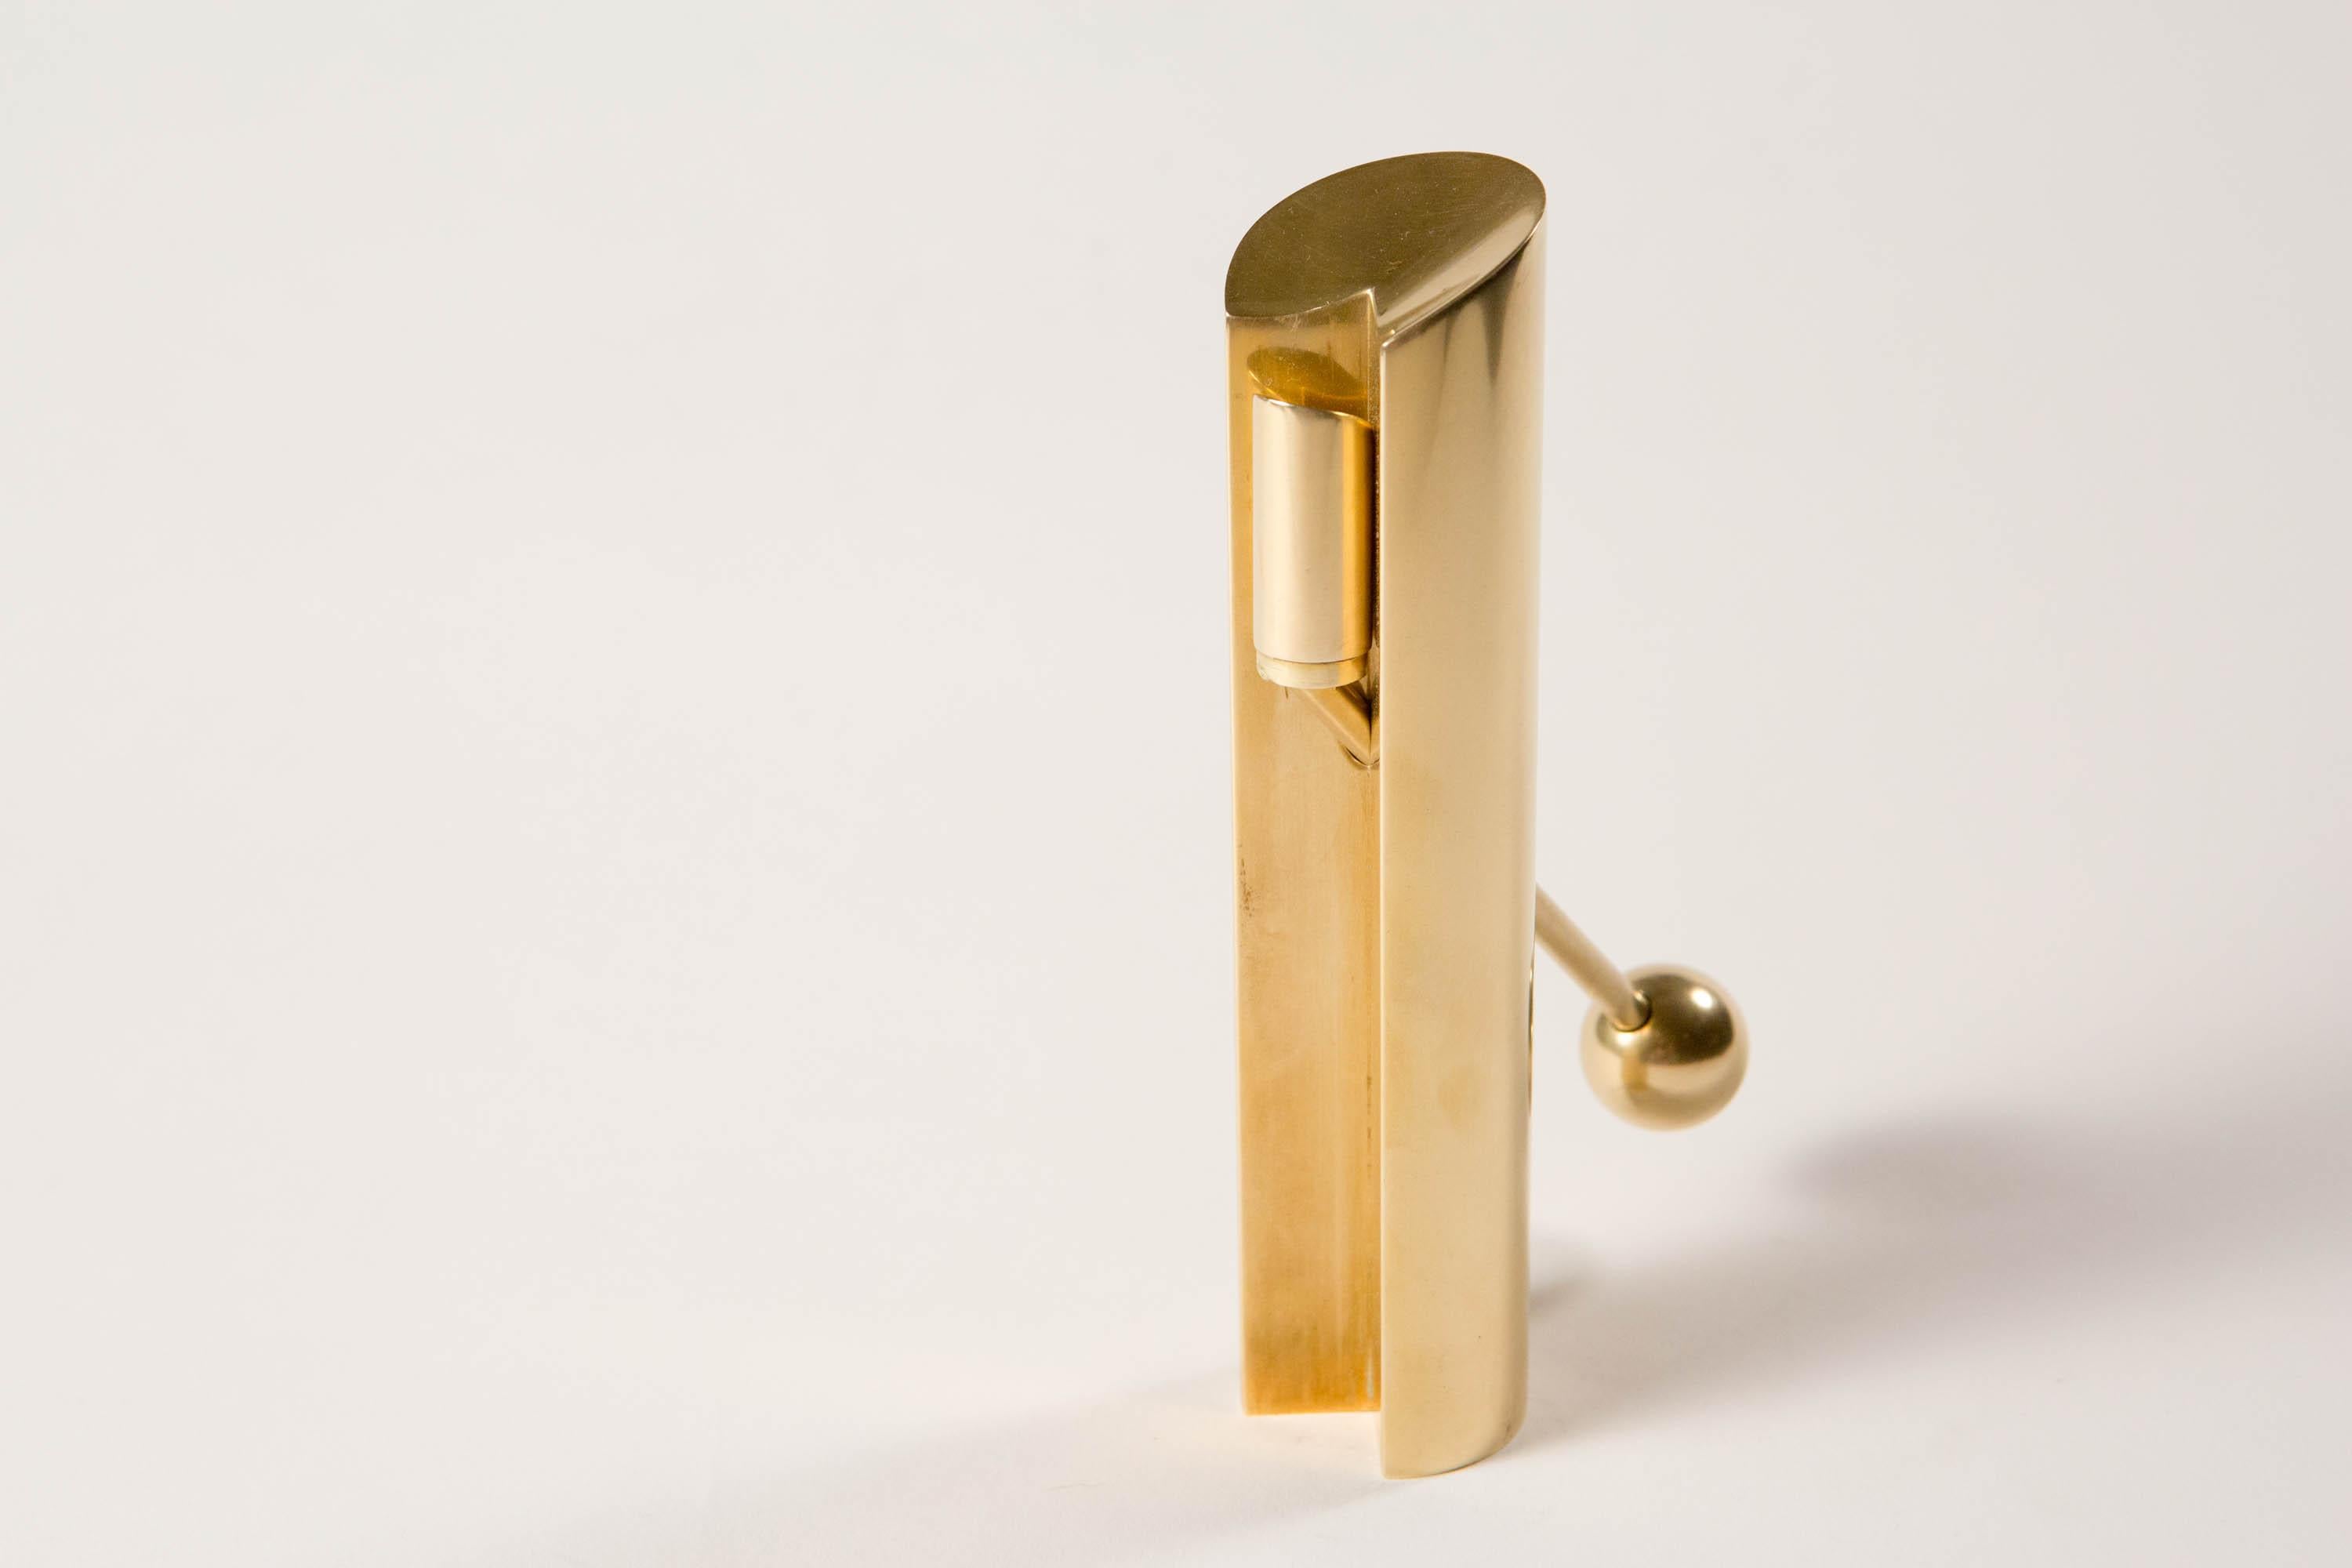 Pierre Forsell - Candlestick Model Variabel Produced by Skultuna, Sweden 1950's

This adjustable candleholder is an exquisite example of the refined approach designed by Pierre Forsell for Skultuna. Consisting of solid brass this piece can fit an